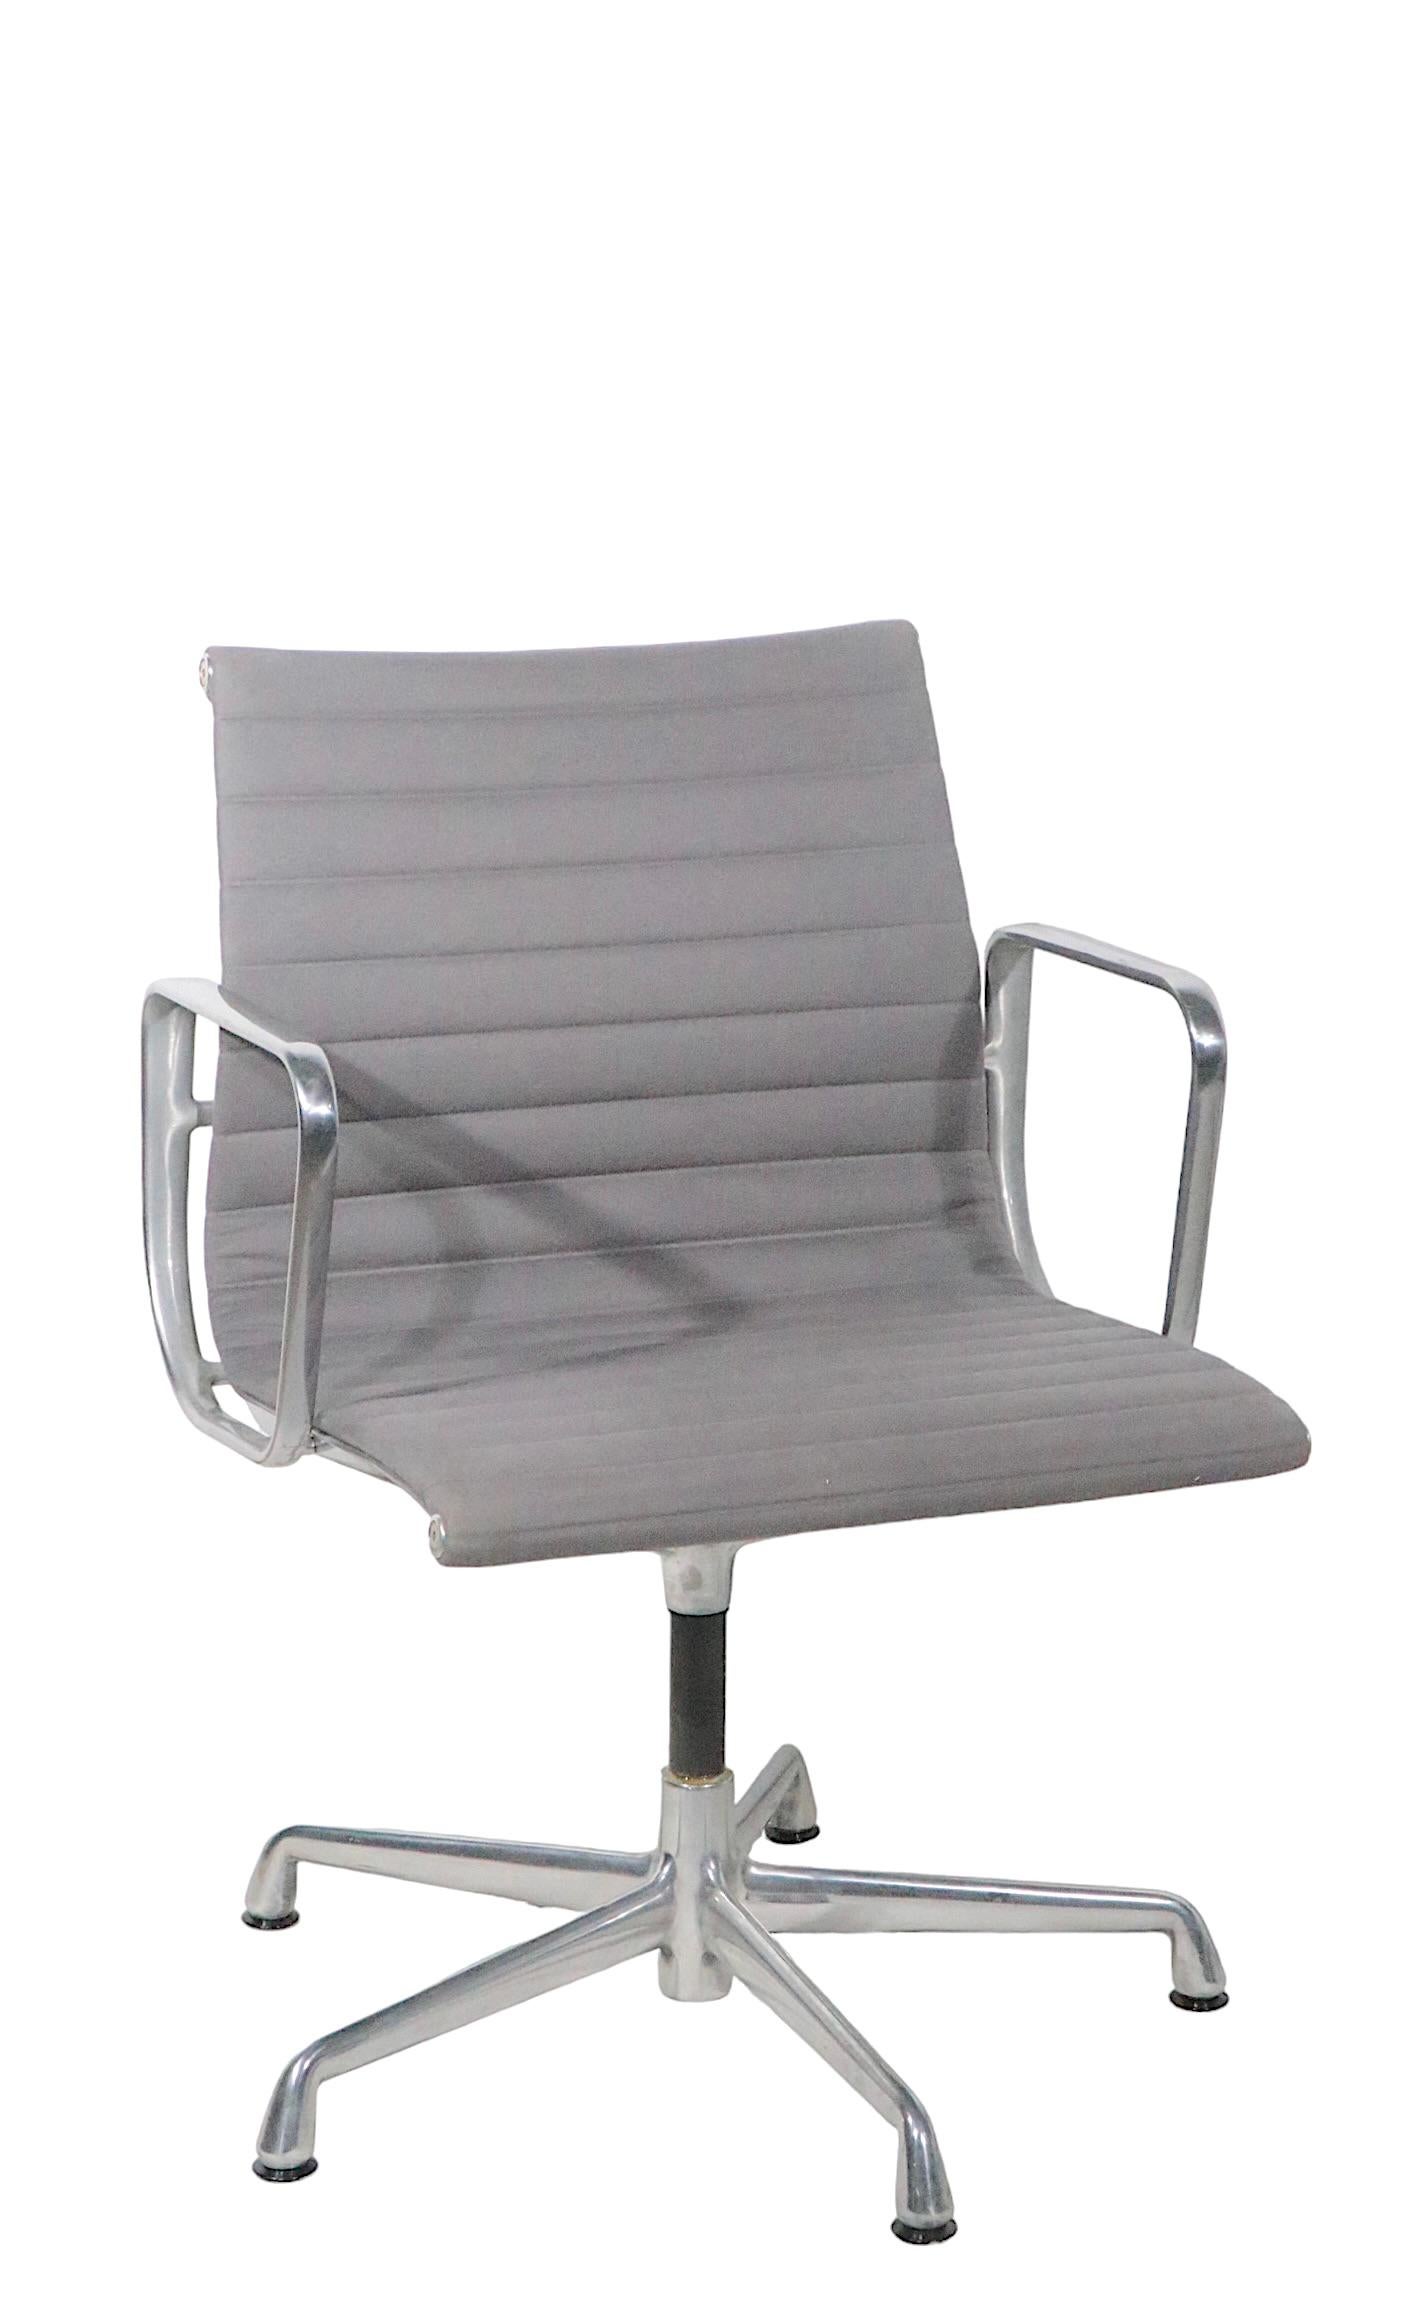 Eames Management Chairs in Grey Fabric Upholstery c. 1980 - 1990s 4 Available  For Sale 6